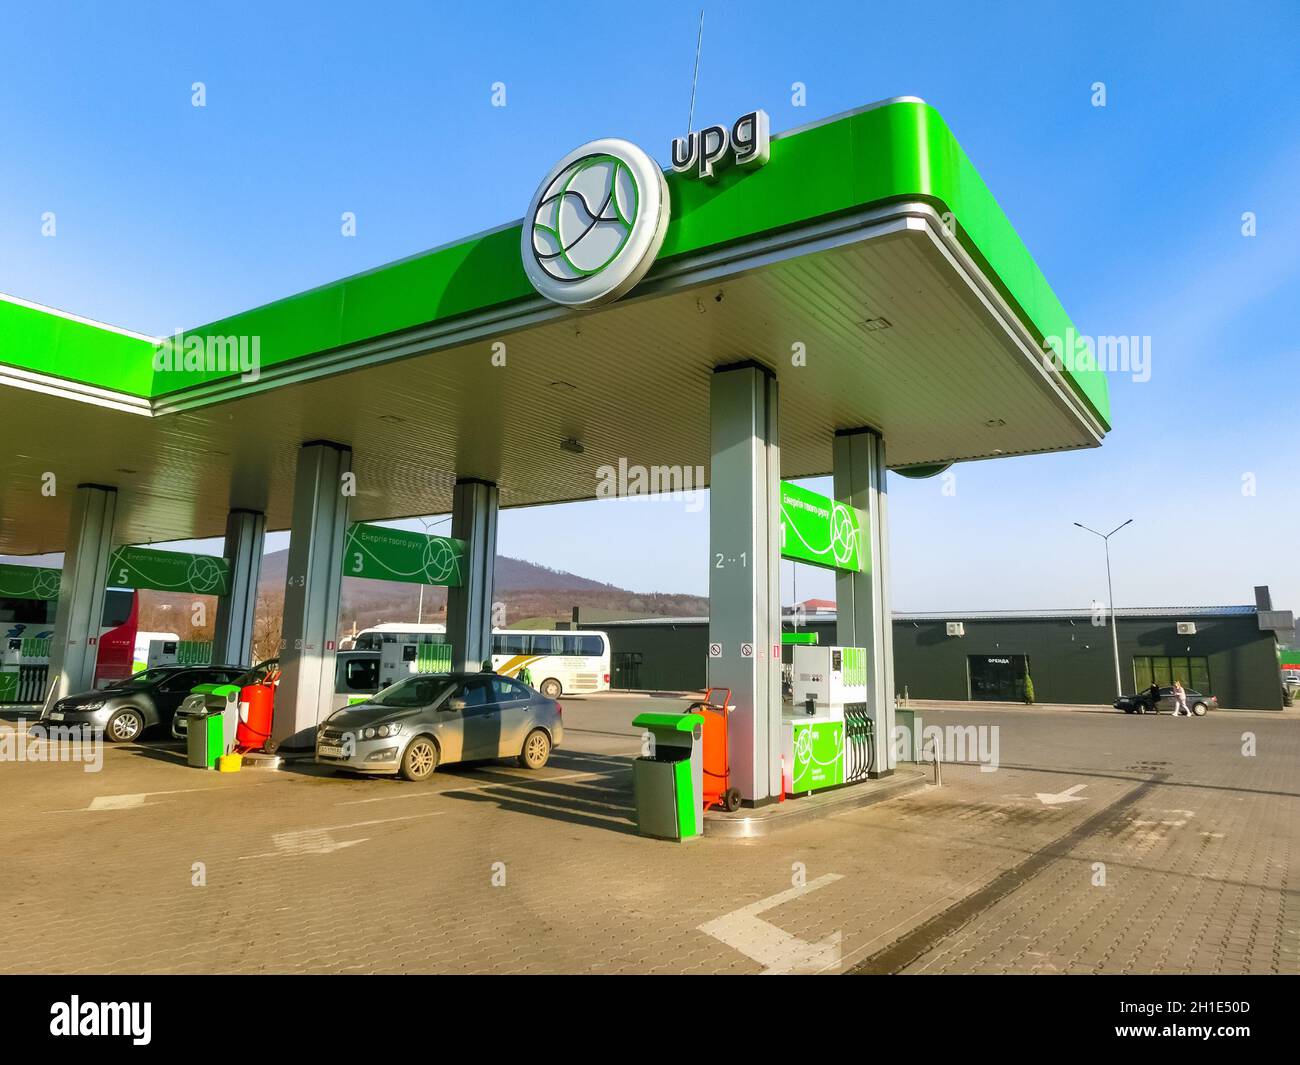 Poprad, Slovakia - December 31, 2019: A UPG gas station in Poprad, Slovakia. UPG is Slovakia' leading retailer and wholesaler of oil, gasoline and nat Stock Photo